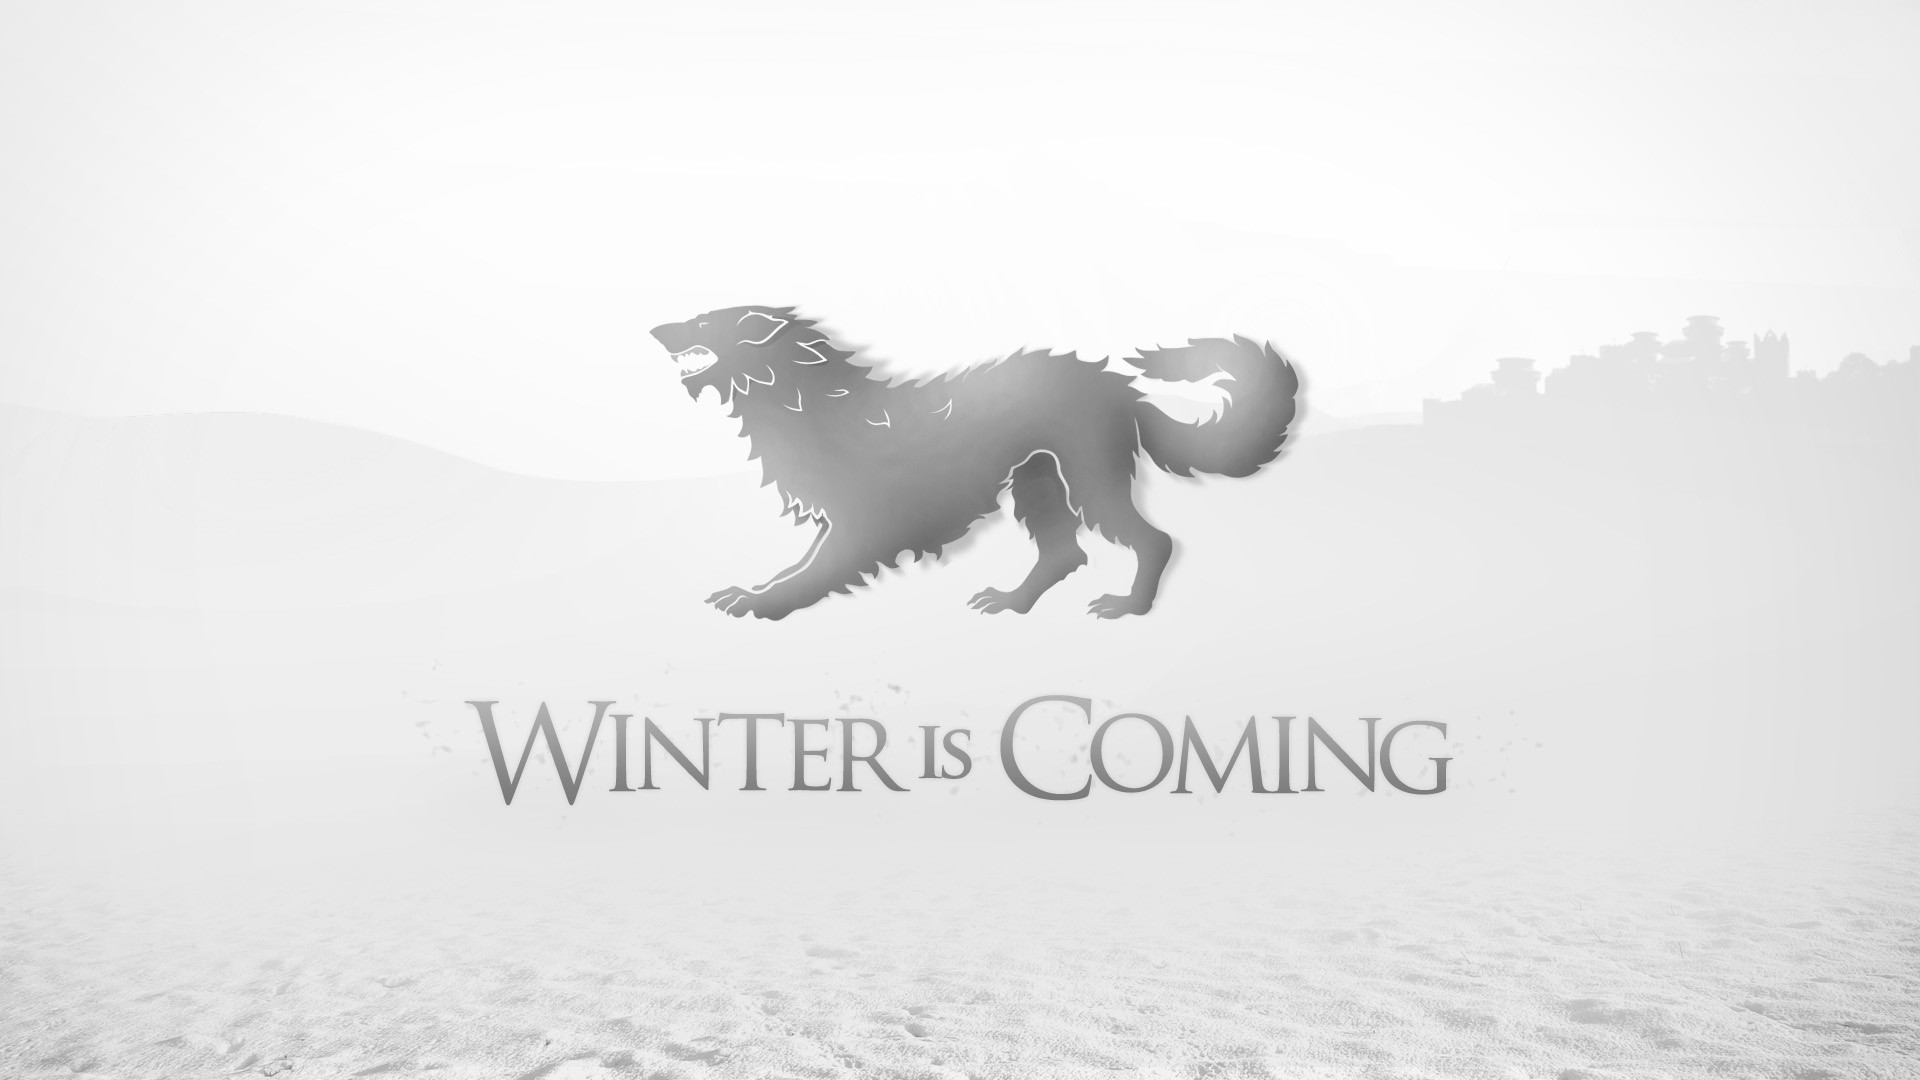 Game Of Thrones Winter Is Coming House Stark Direwolf 1920x1080